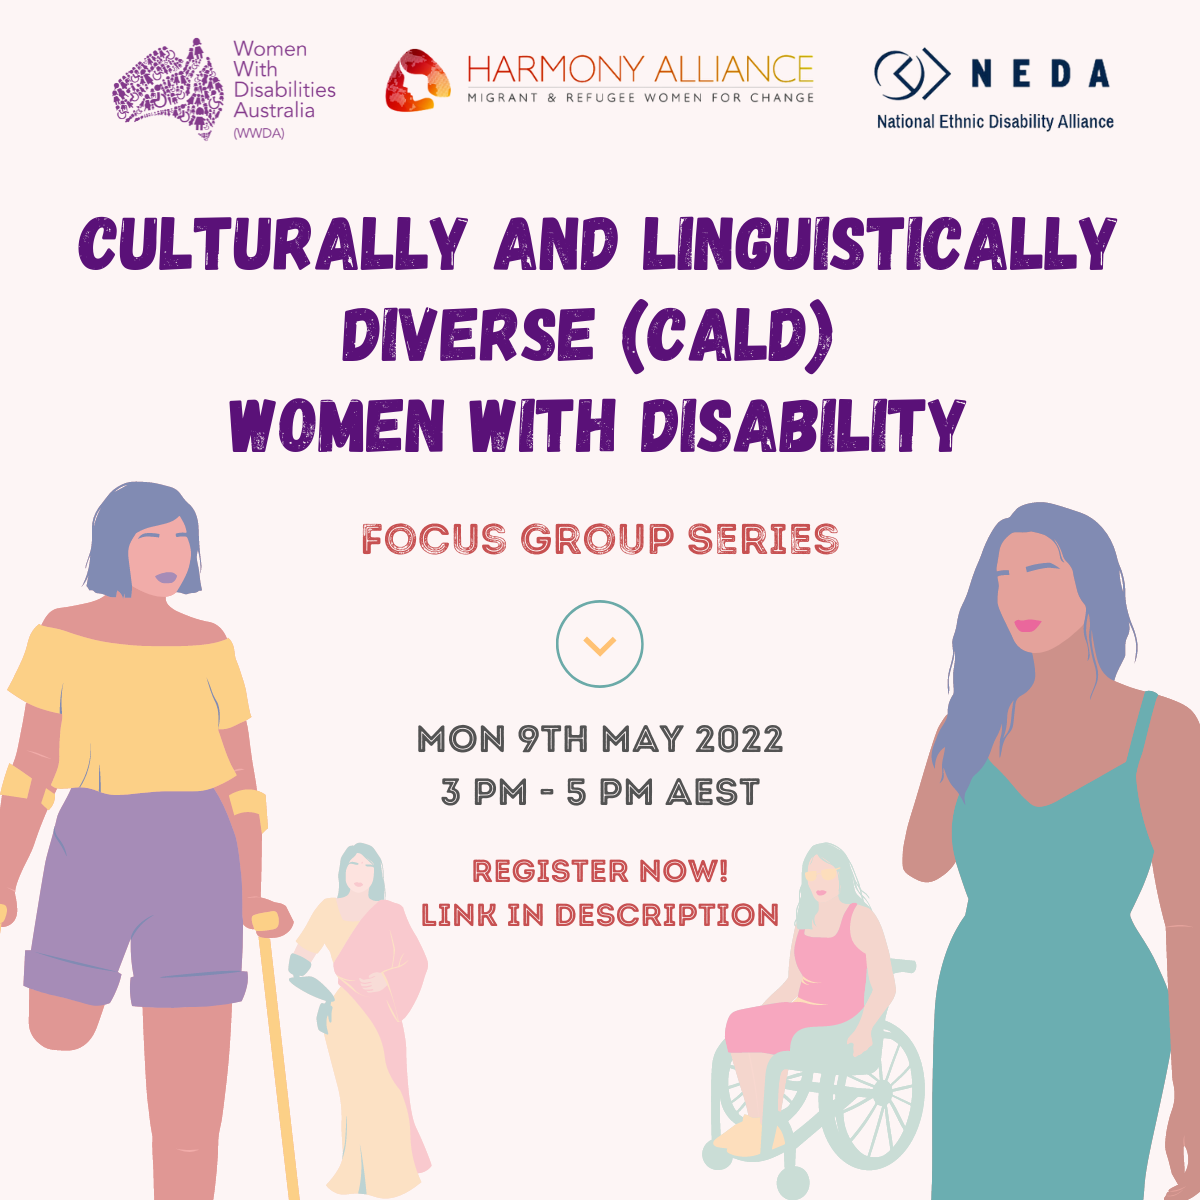 On a pale pink background, purple text reads "Culturally and linguistically diverse (CALD) women with disability". Below, in red text reads "Focus group series". An arrow points downwards to text that reads "Mon 9th May 2022 3pm-5pm AEST. Register now! Link in description!" Opaque illustrations of different women with disabilities from different backgrounds surround the text. At the top of the image are the WWDA, Harmony Alliance and NEDA logos.